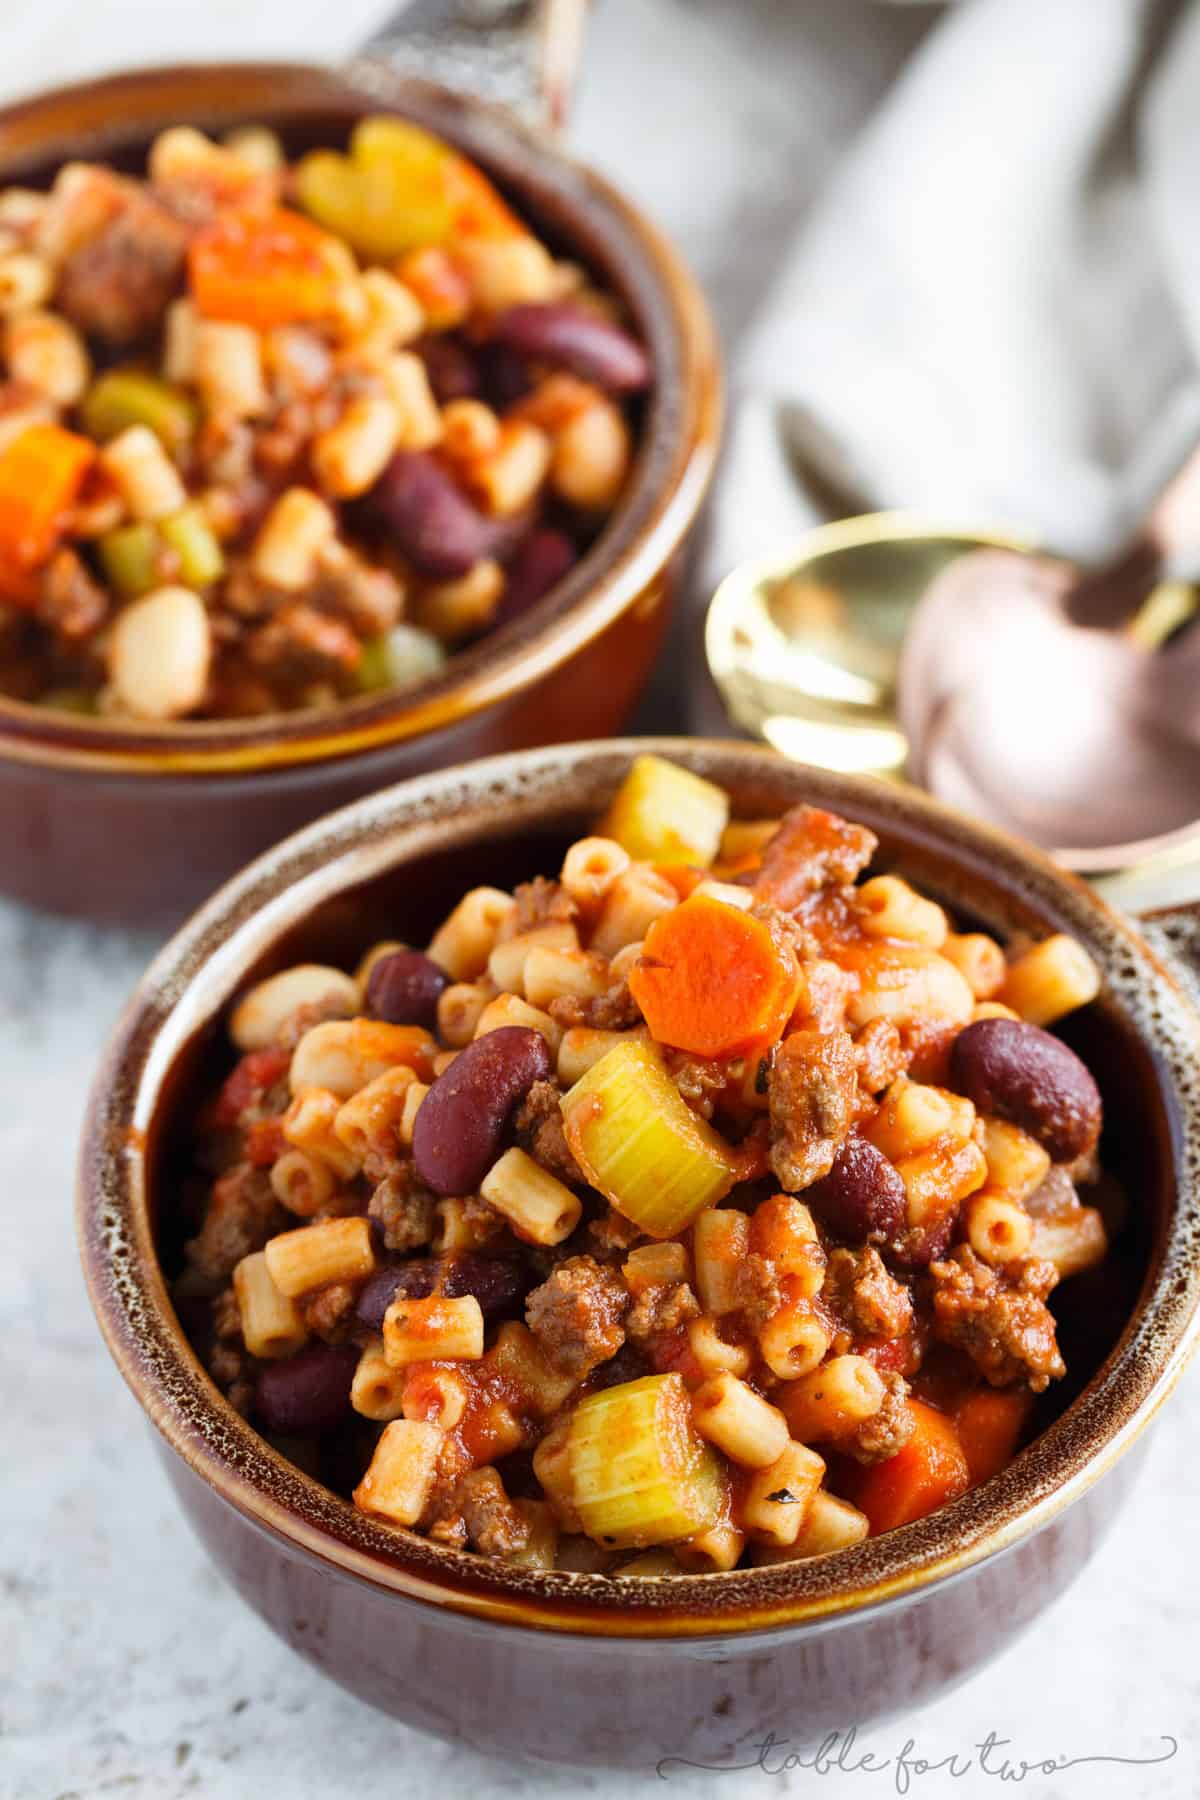 A thick and hearty slow cooker meal. This slow cooker pasta fagioli is full of hearty beef, beans, veggies, and pasta. Makes for great comfort food in the cooler months or for busy weeks that leftovers won't get boring!